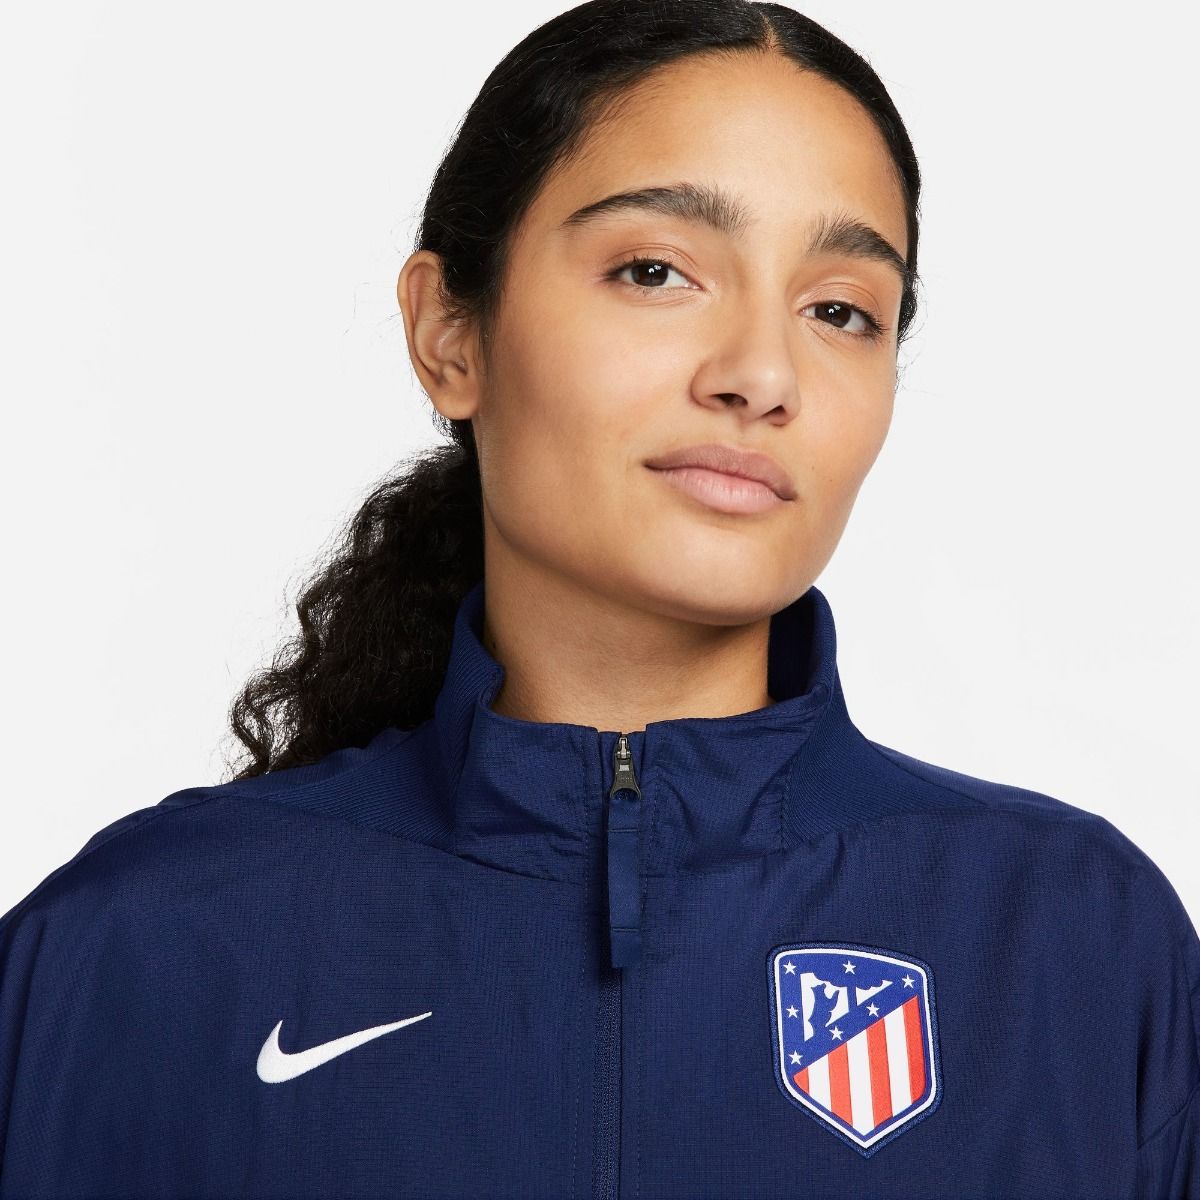 CHAQUETA ANTHEM MUJER NIKE image number null